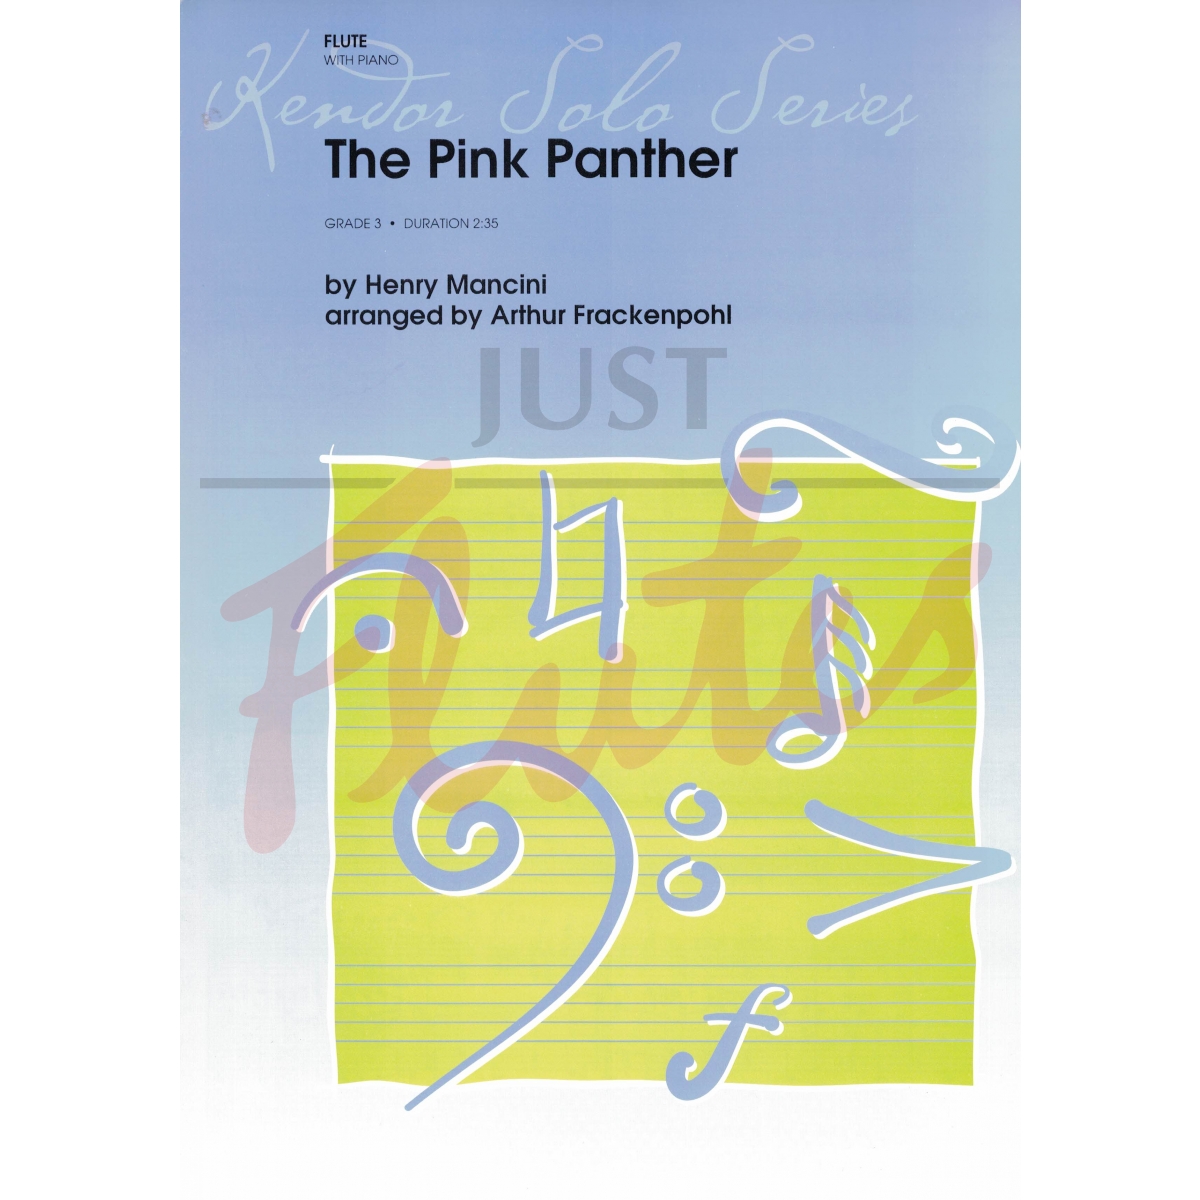 The Pink Panther [Flute and Piano]